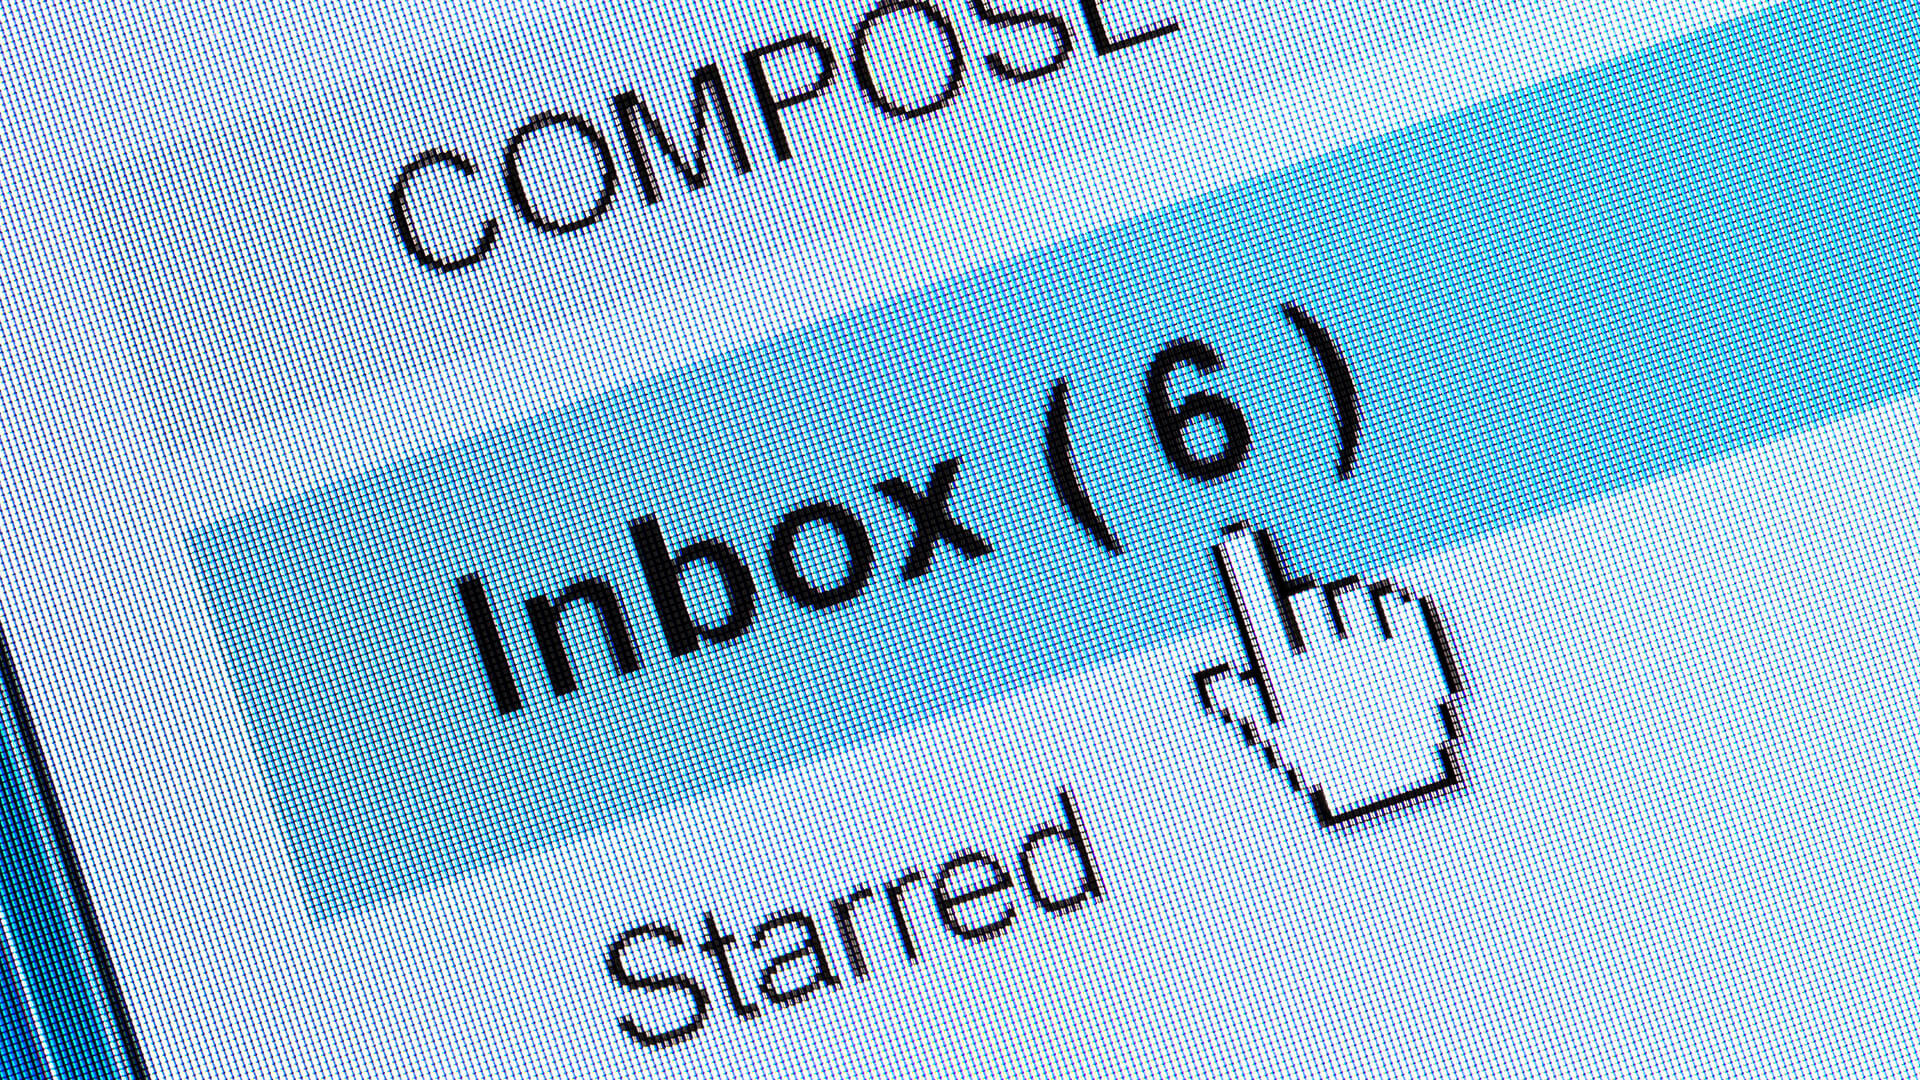 The key to email marketing success